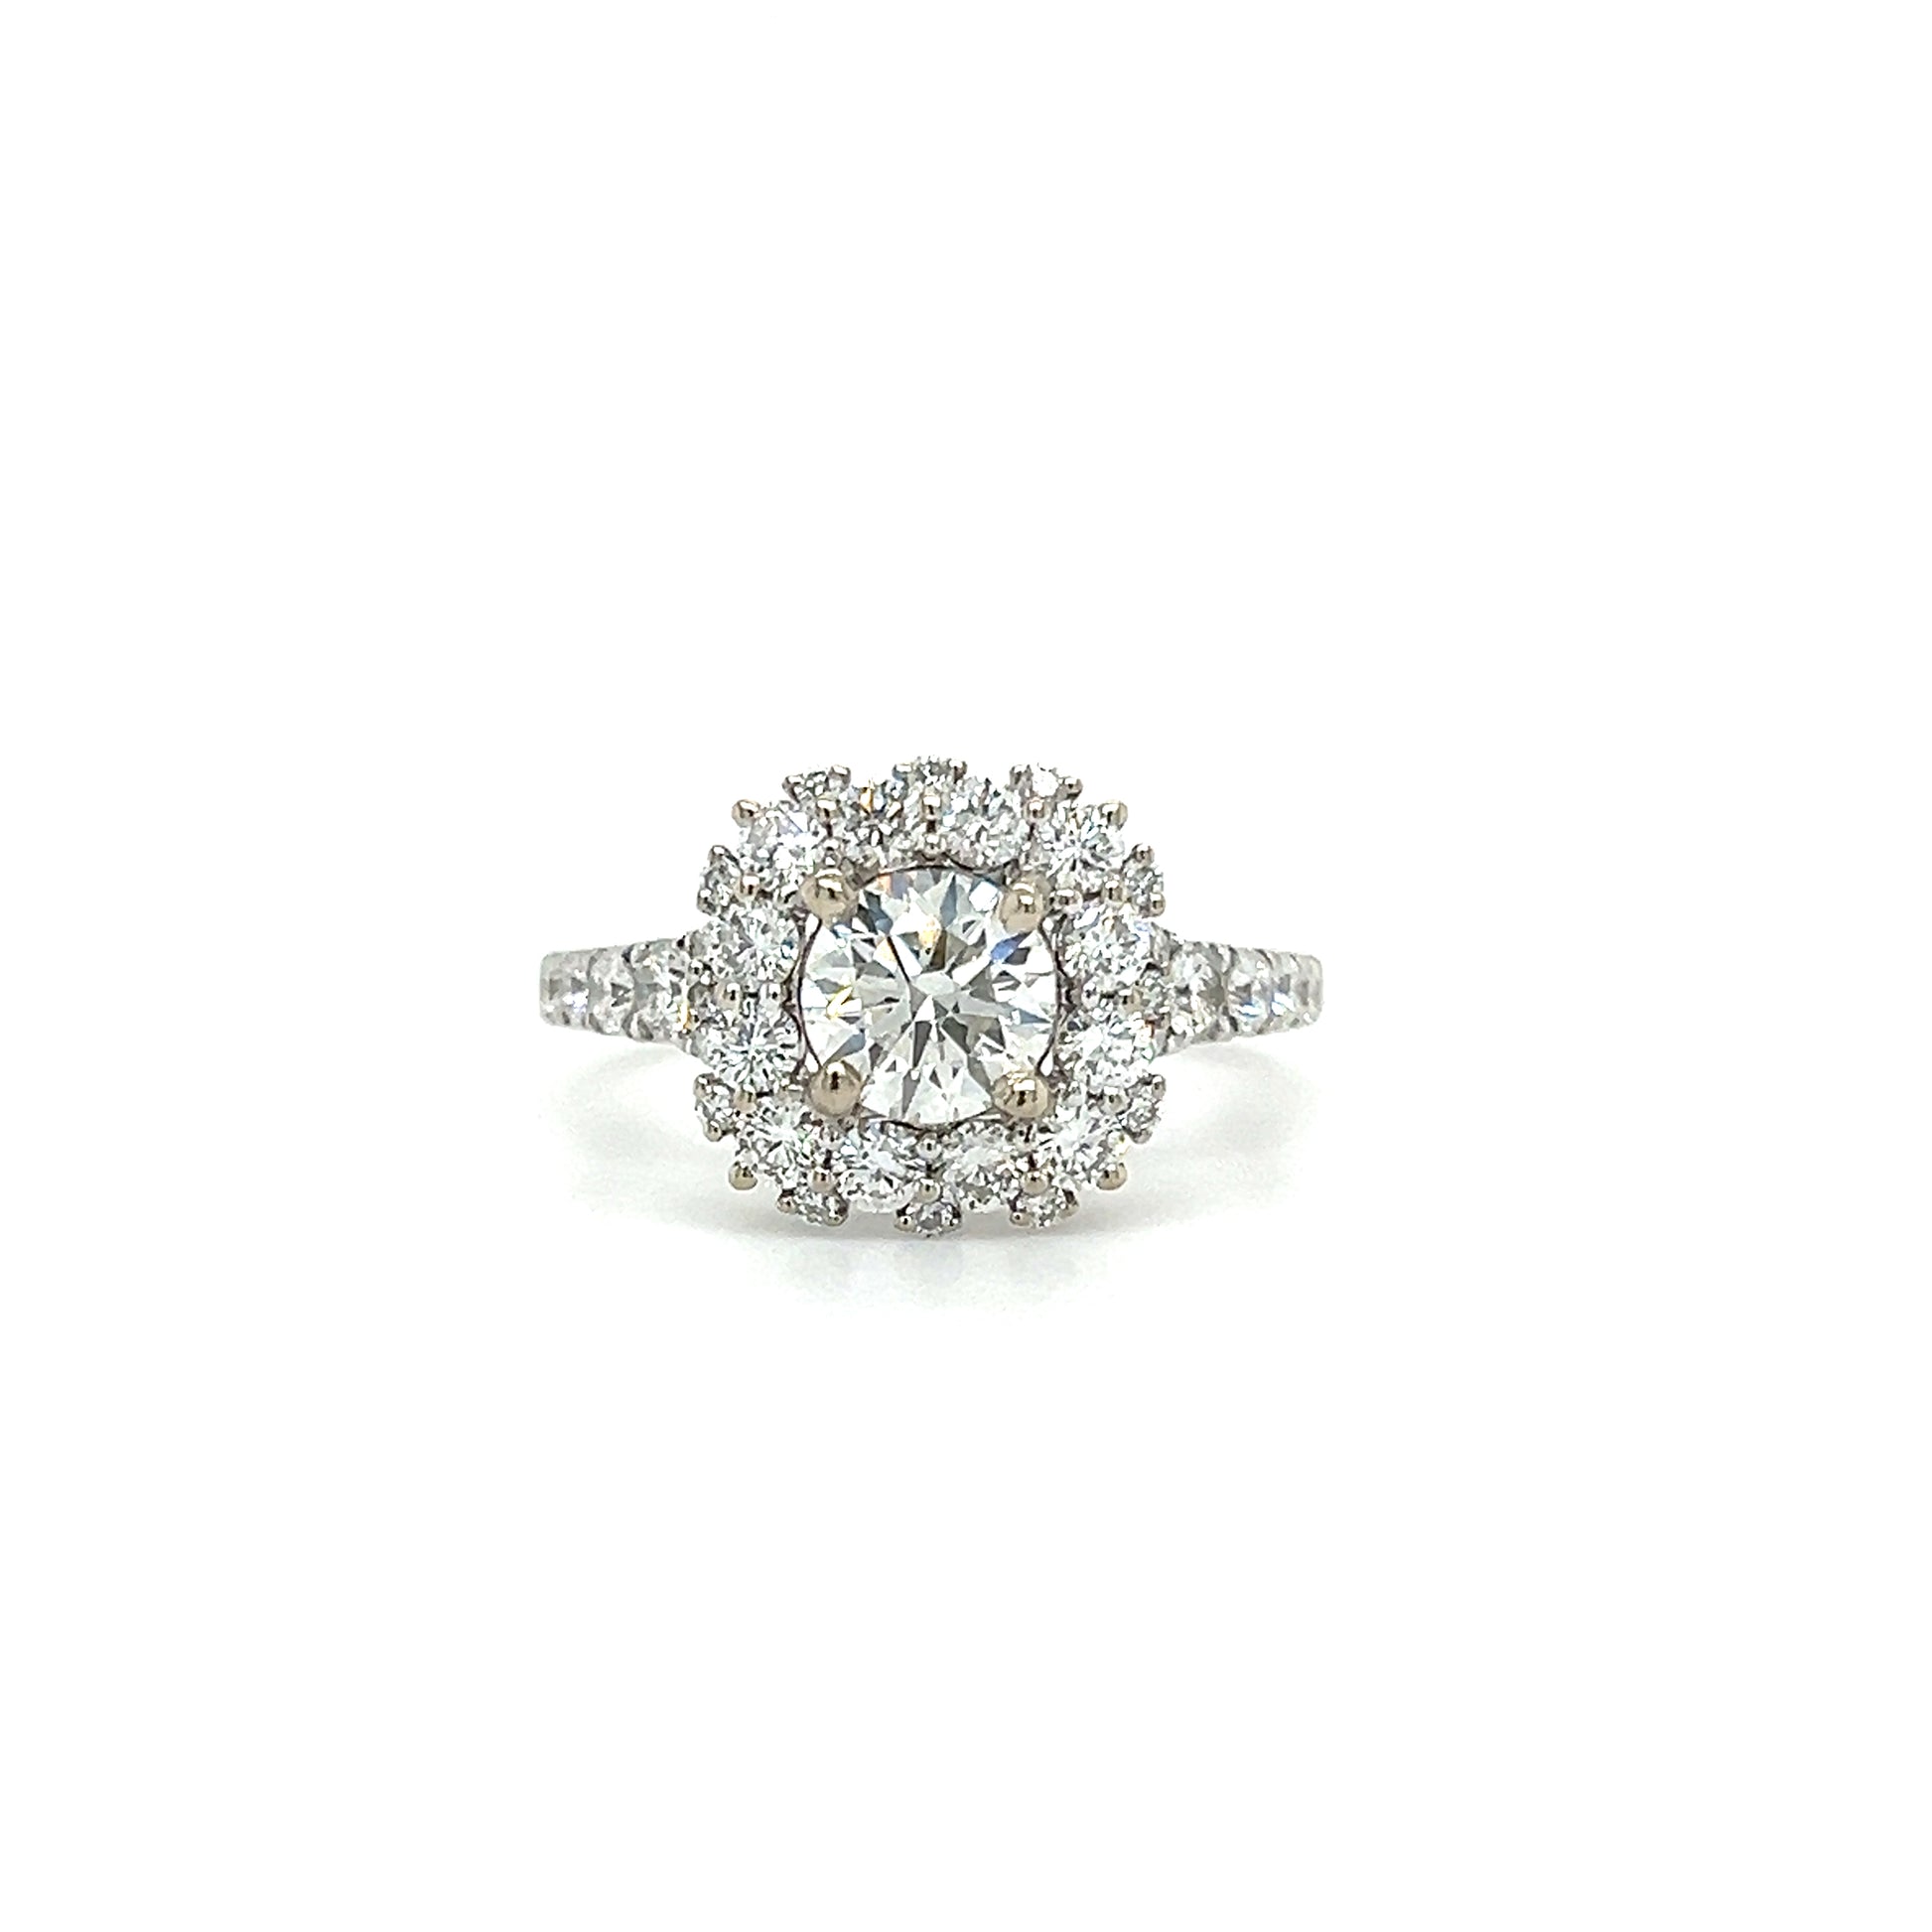 Diamond Halo Ring with 1.66ctw of Diamonds in 14K White Gold Front View